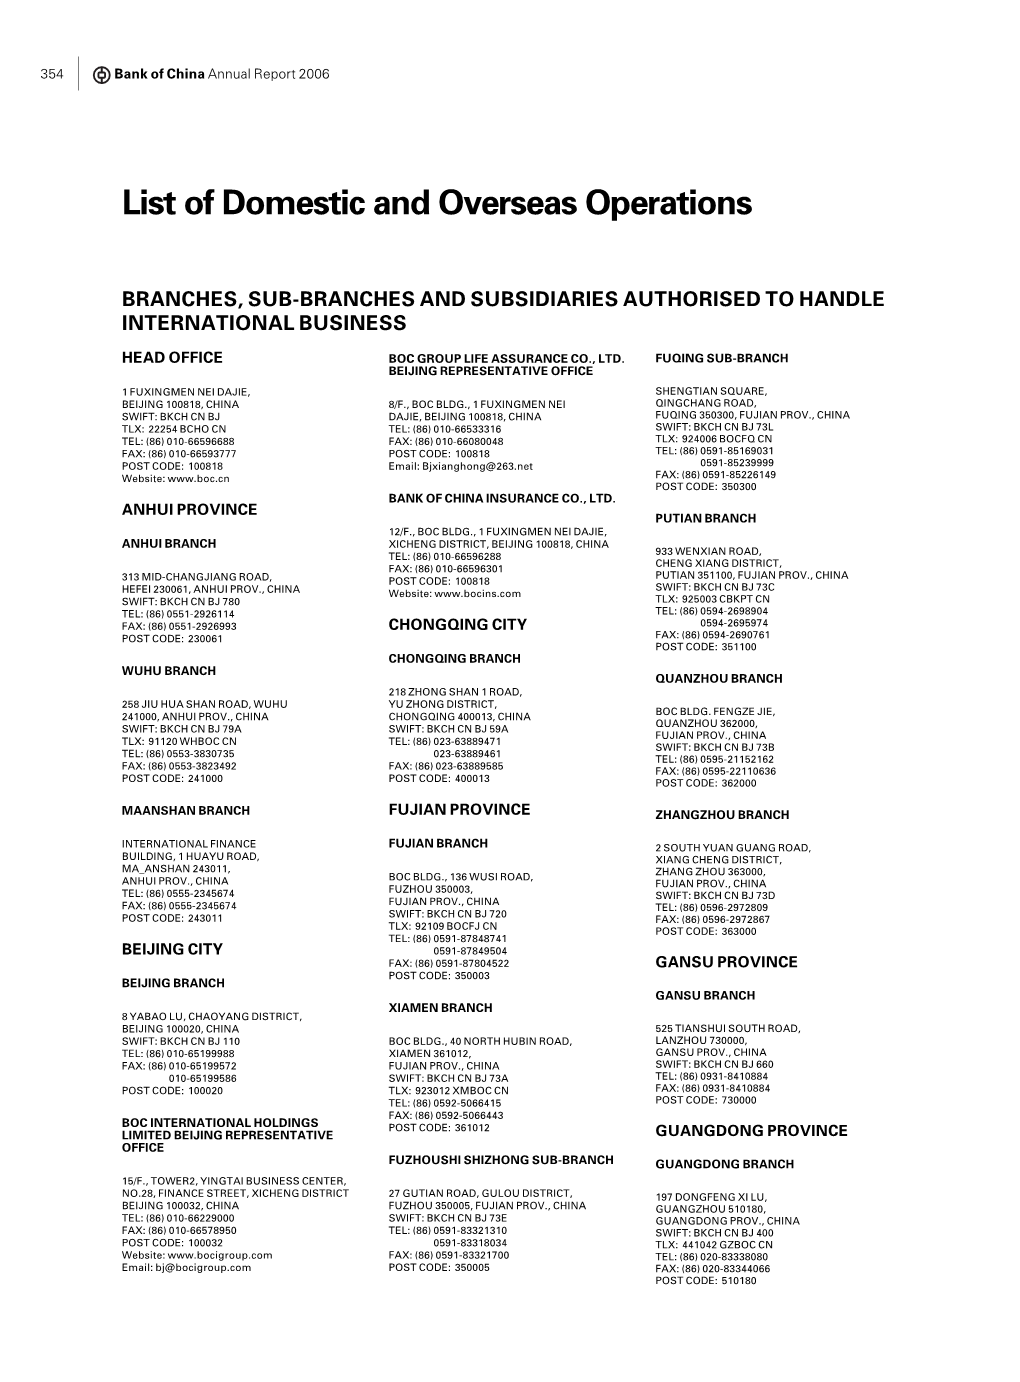 List of Domestic and Overseas Operations